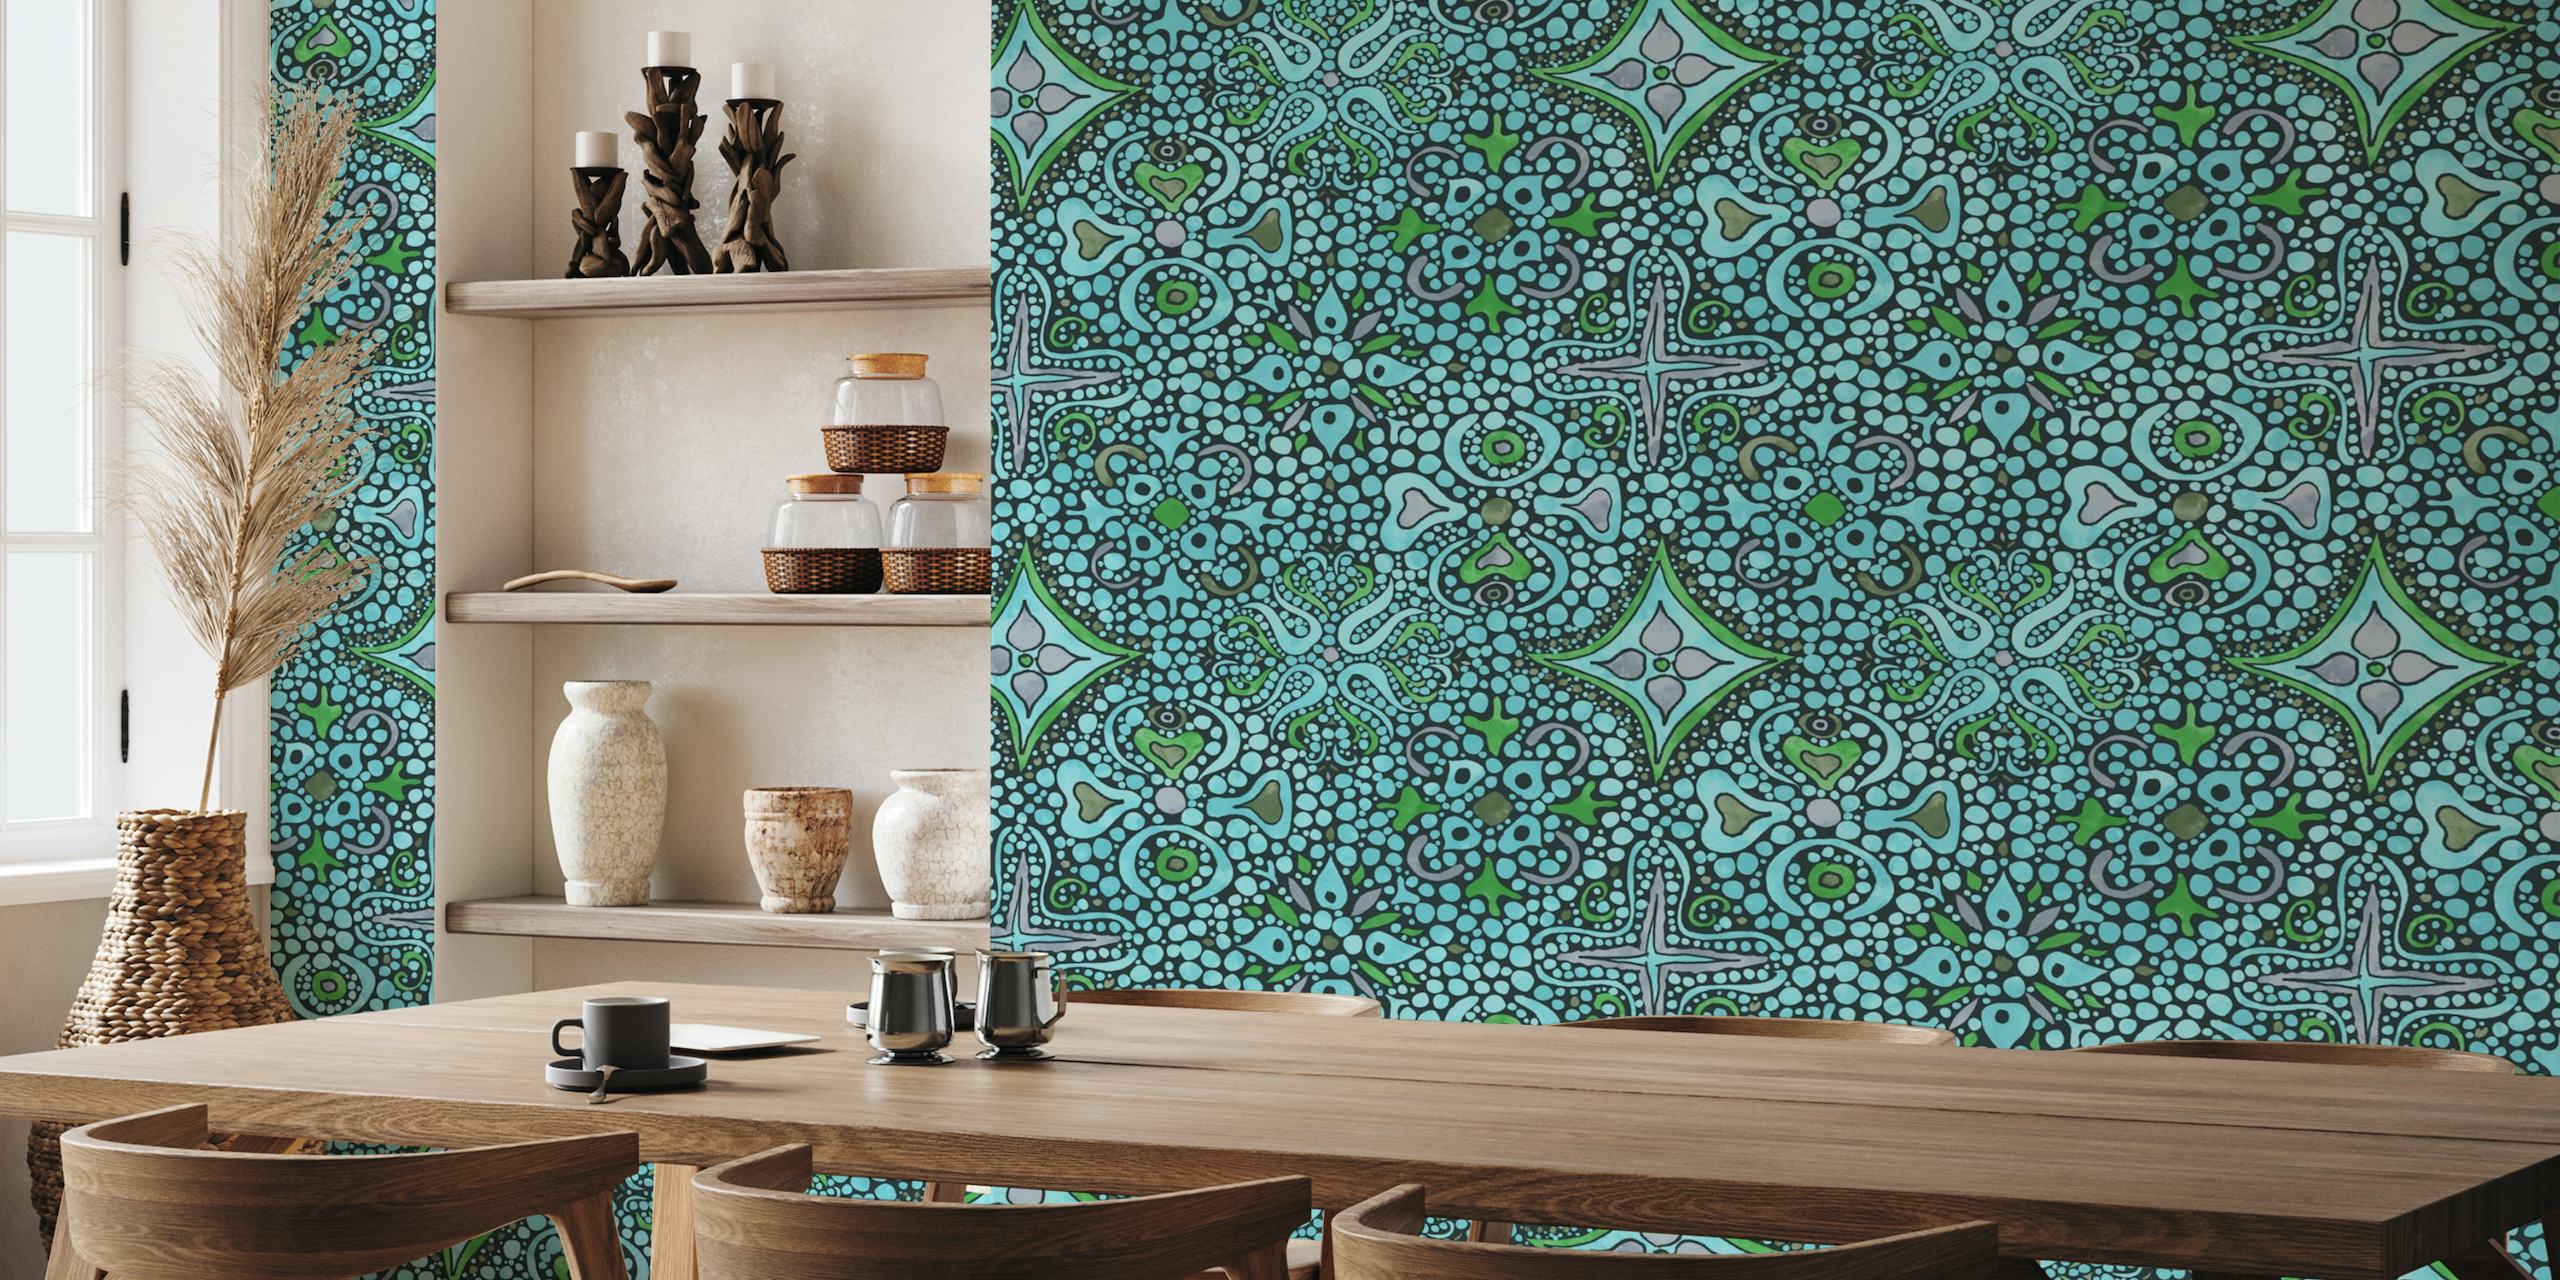 Teal mosaics with maximalist designs wallpaper